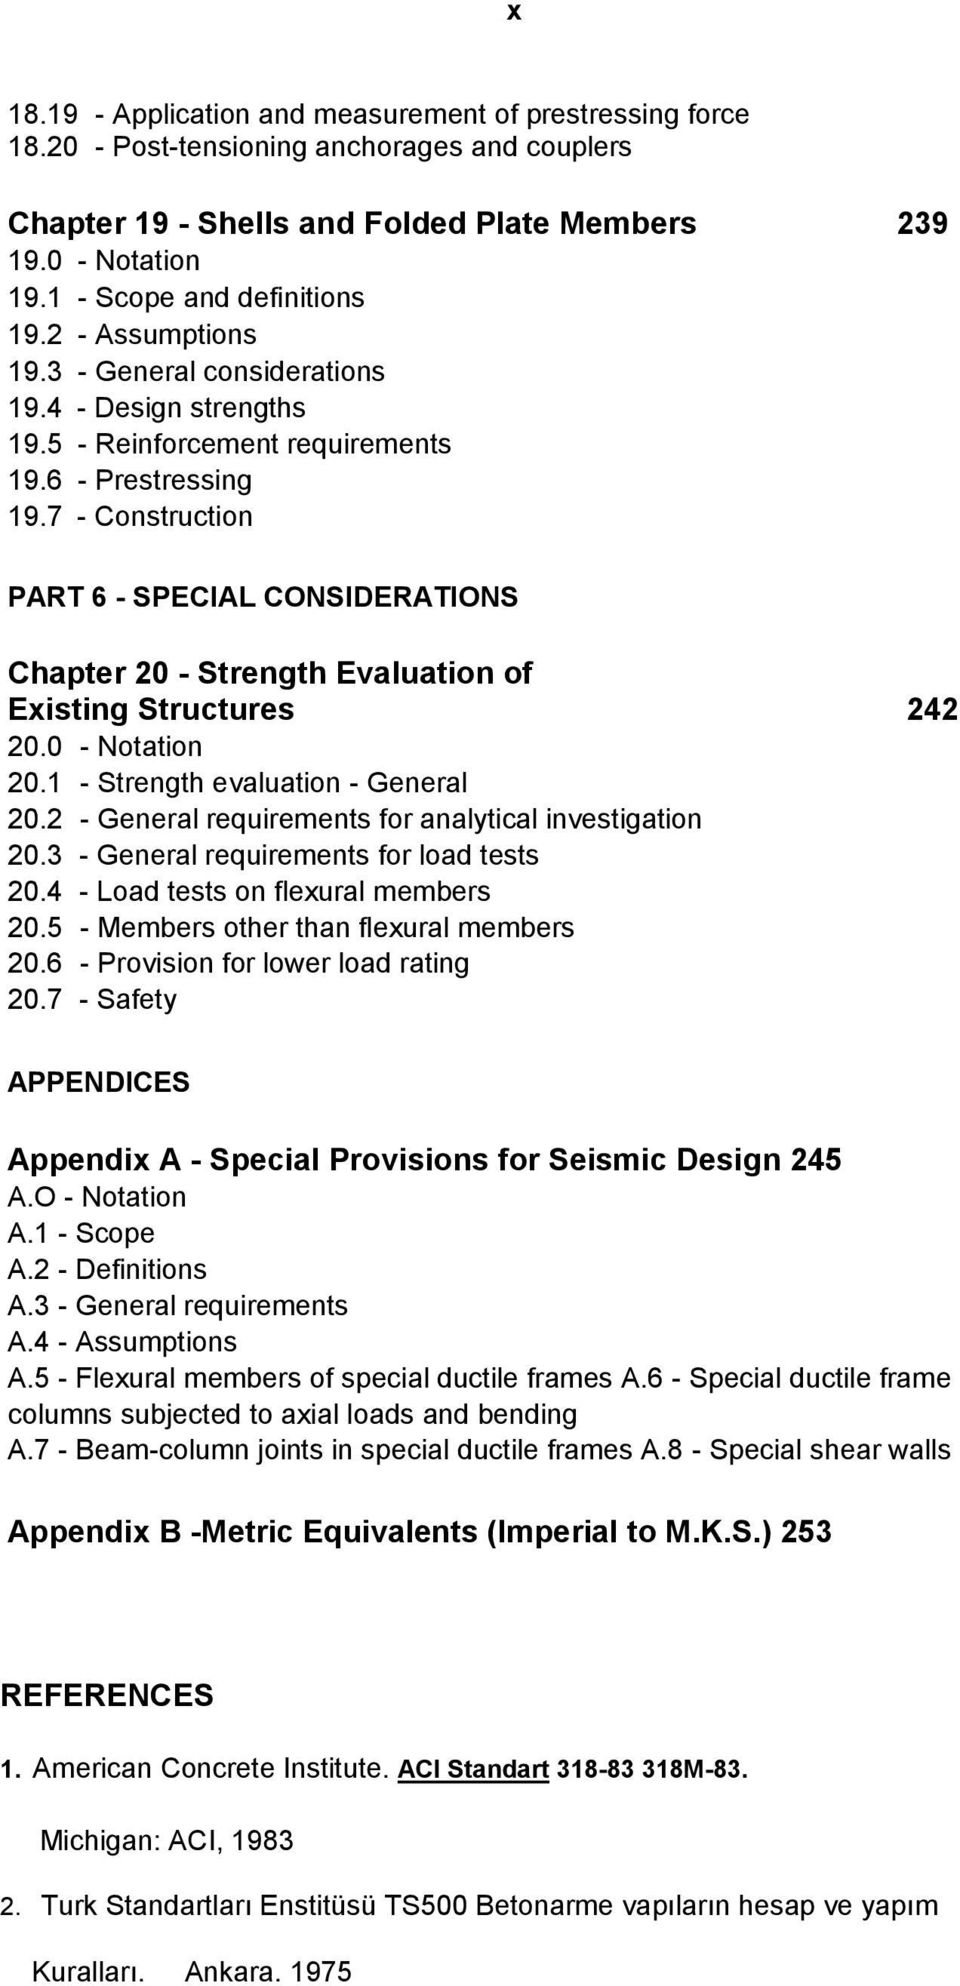 7 - Construction PART 6 - SPECIAL CONSIDERATIONS Chapter 20 - Strength Evaluation of Existing Structures 242 20.0 - Notation 20.1 - Strength evaluation - General 20.